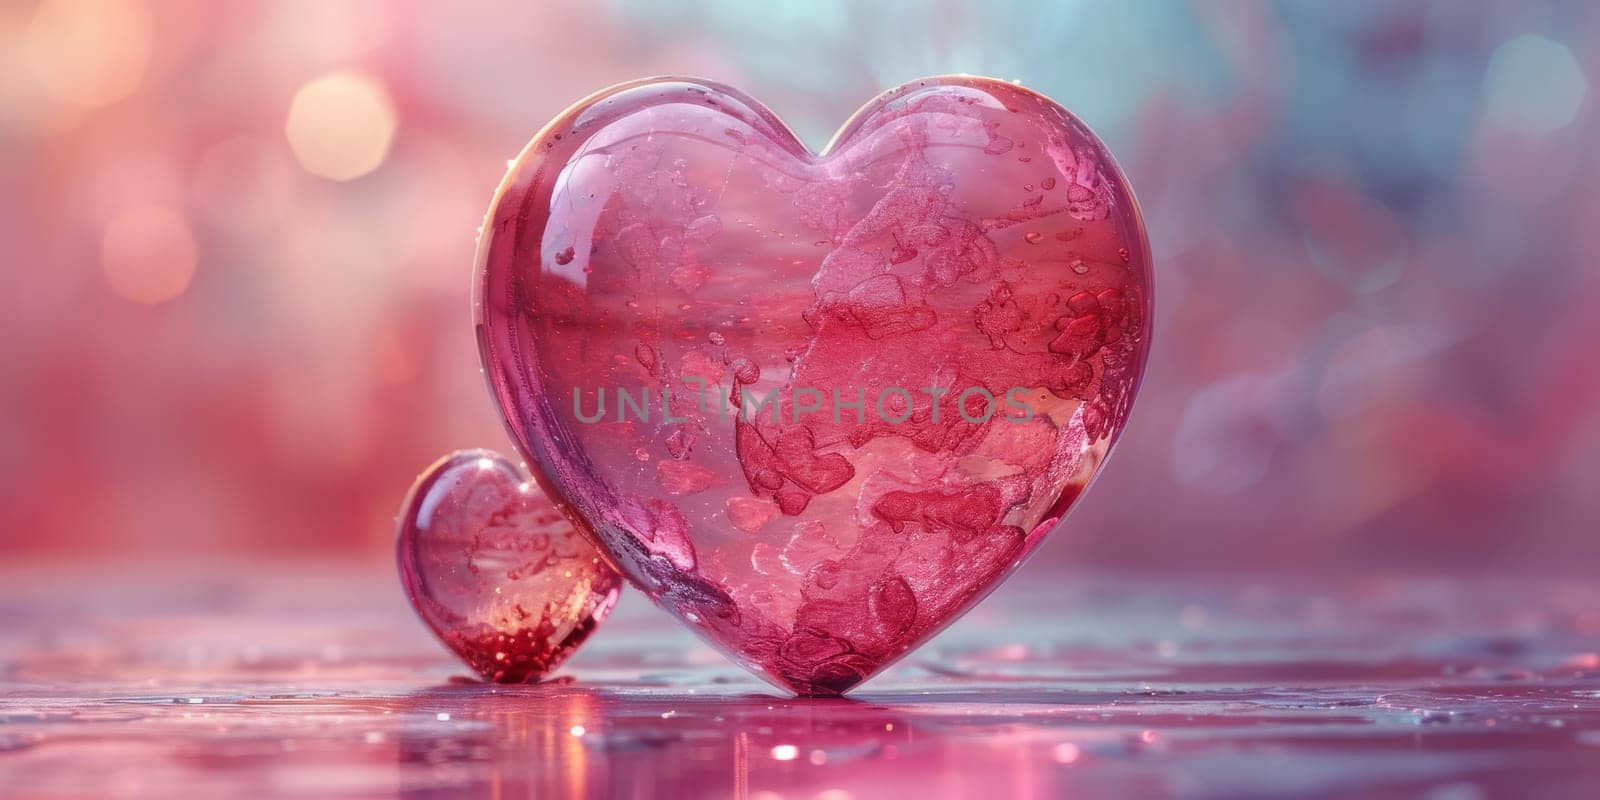 3D heart with pink roses, against a background of clouds.